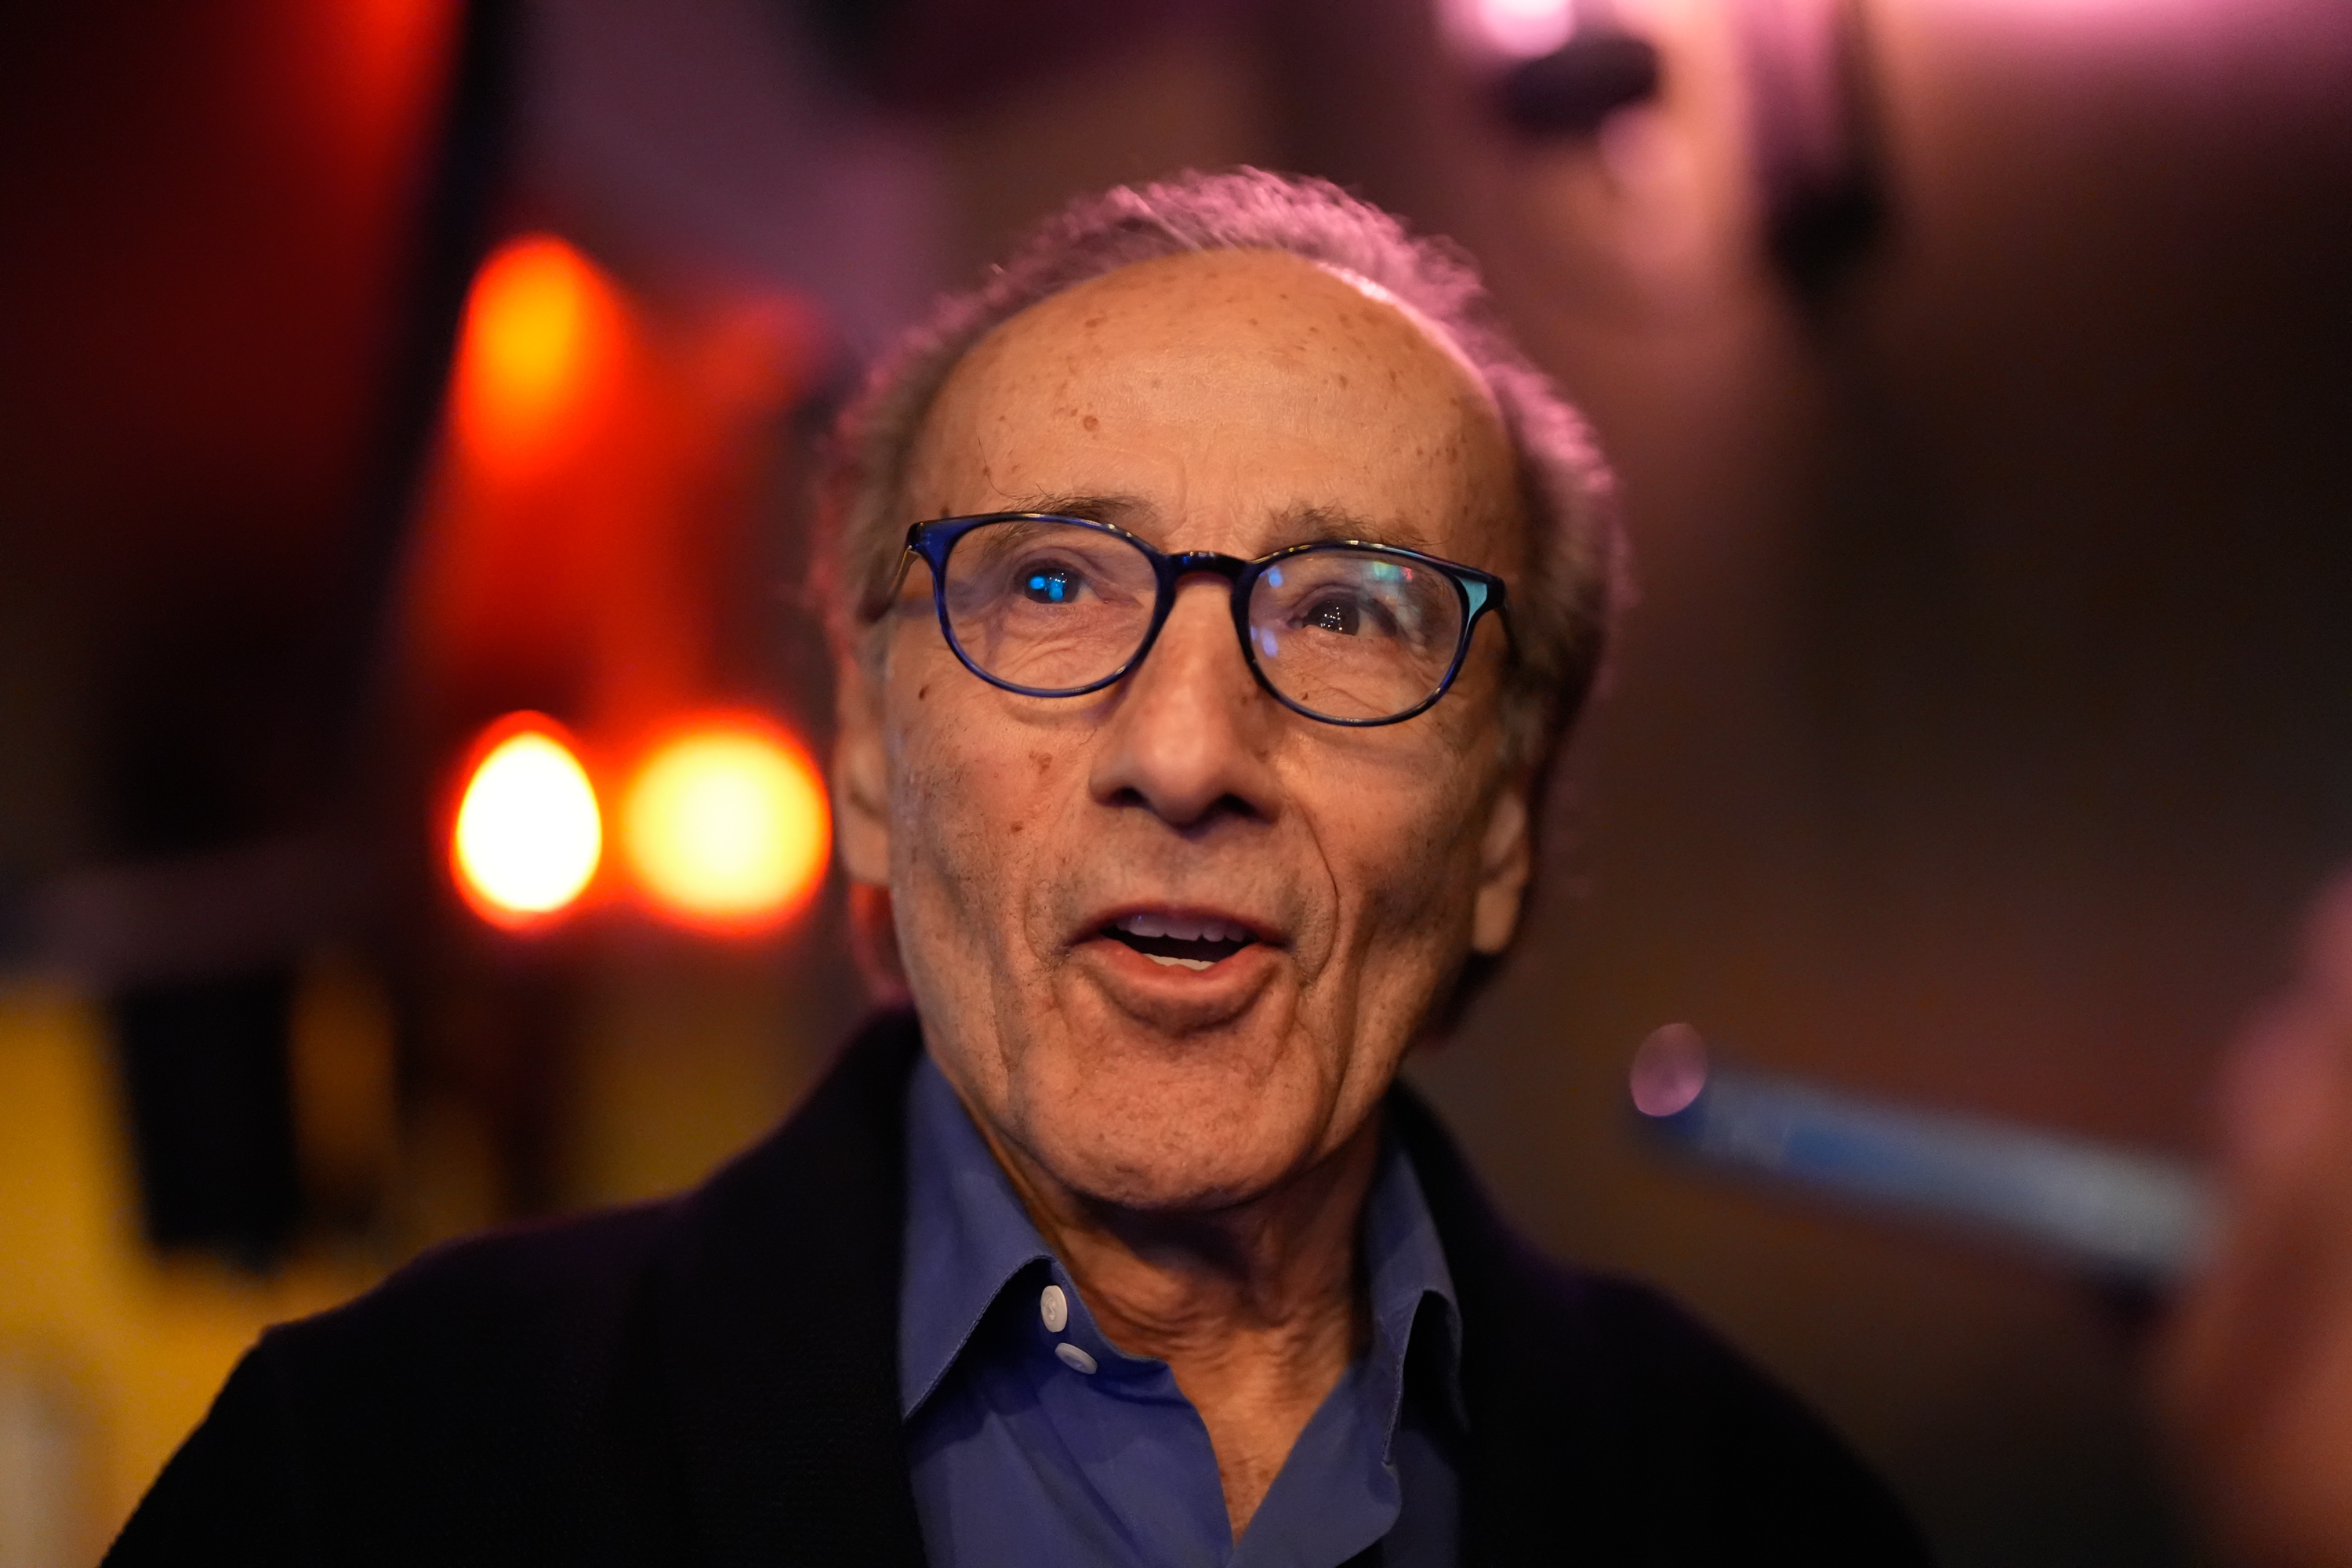 An elderly man with glasses and thinning hair is smiling in a dimly lit room with warm lights in the background.